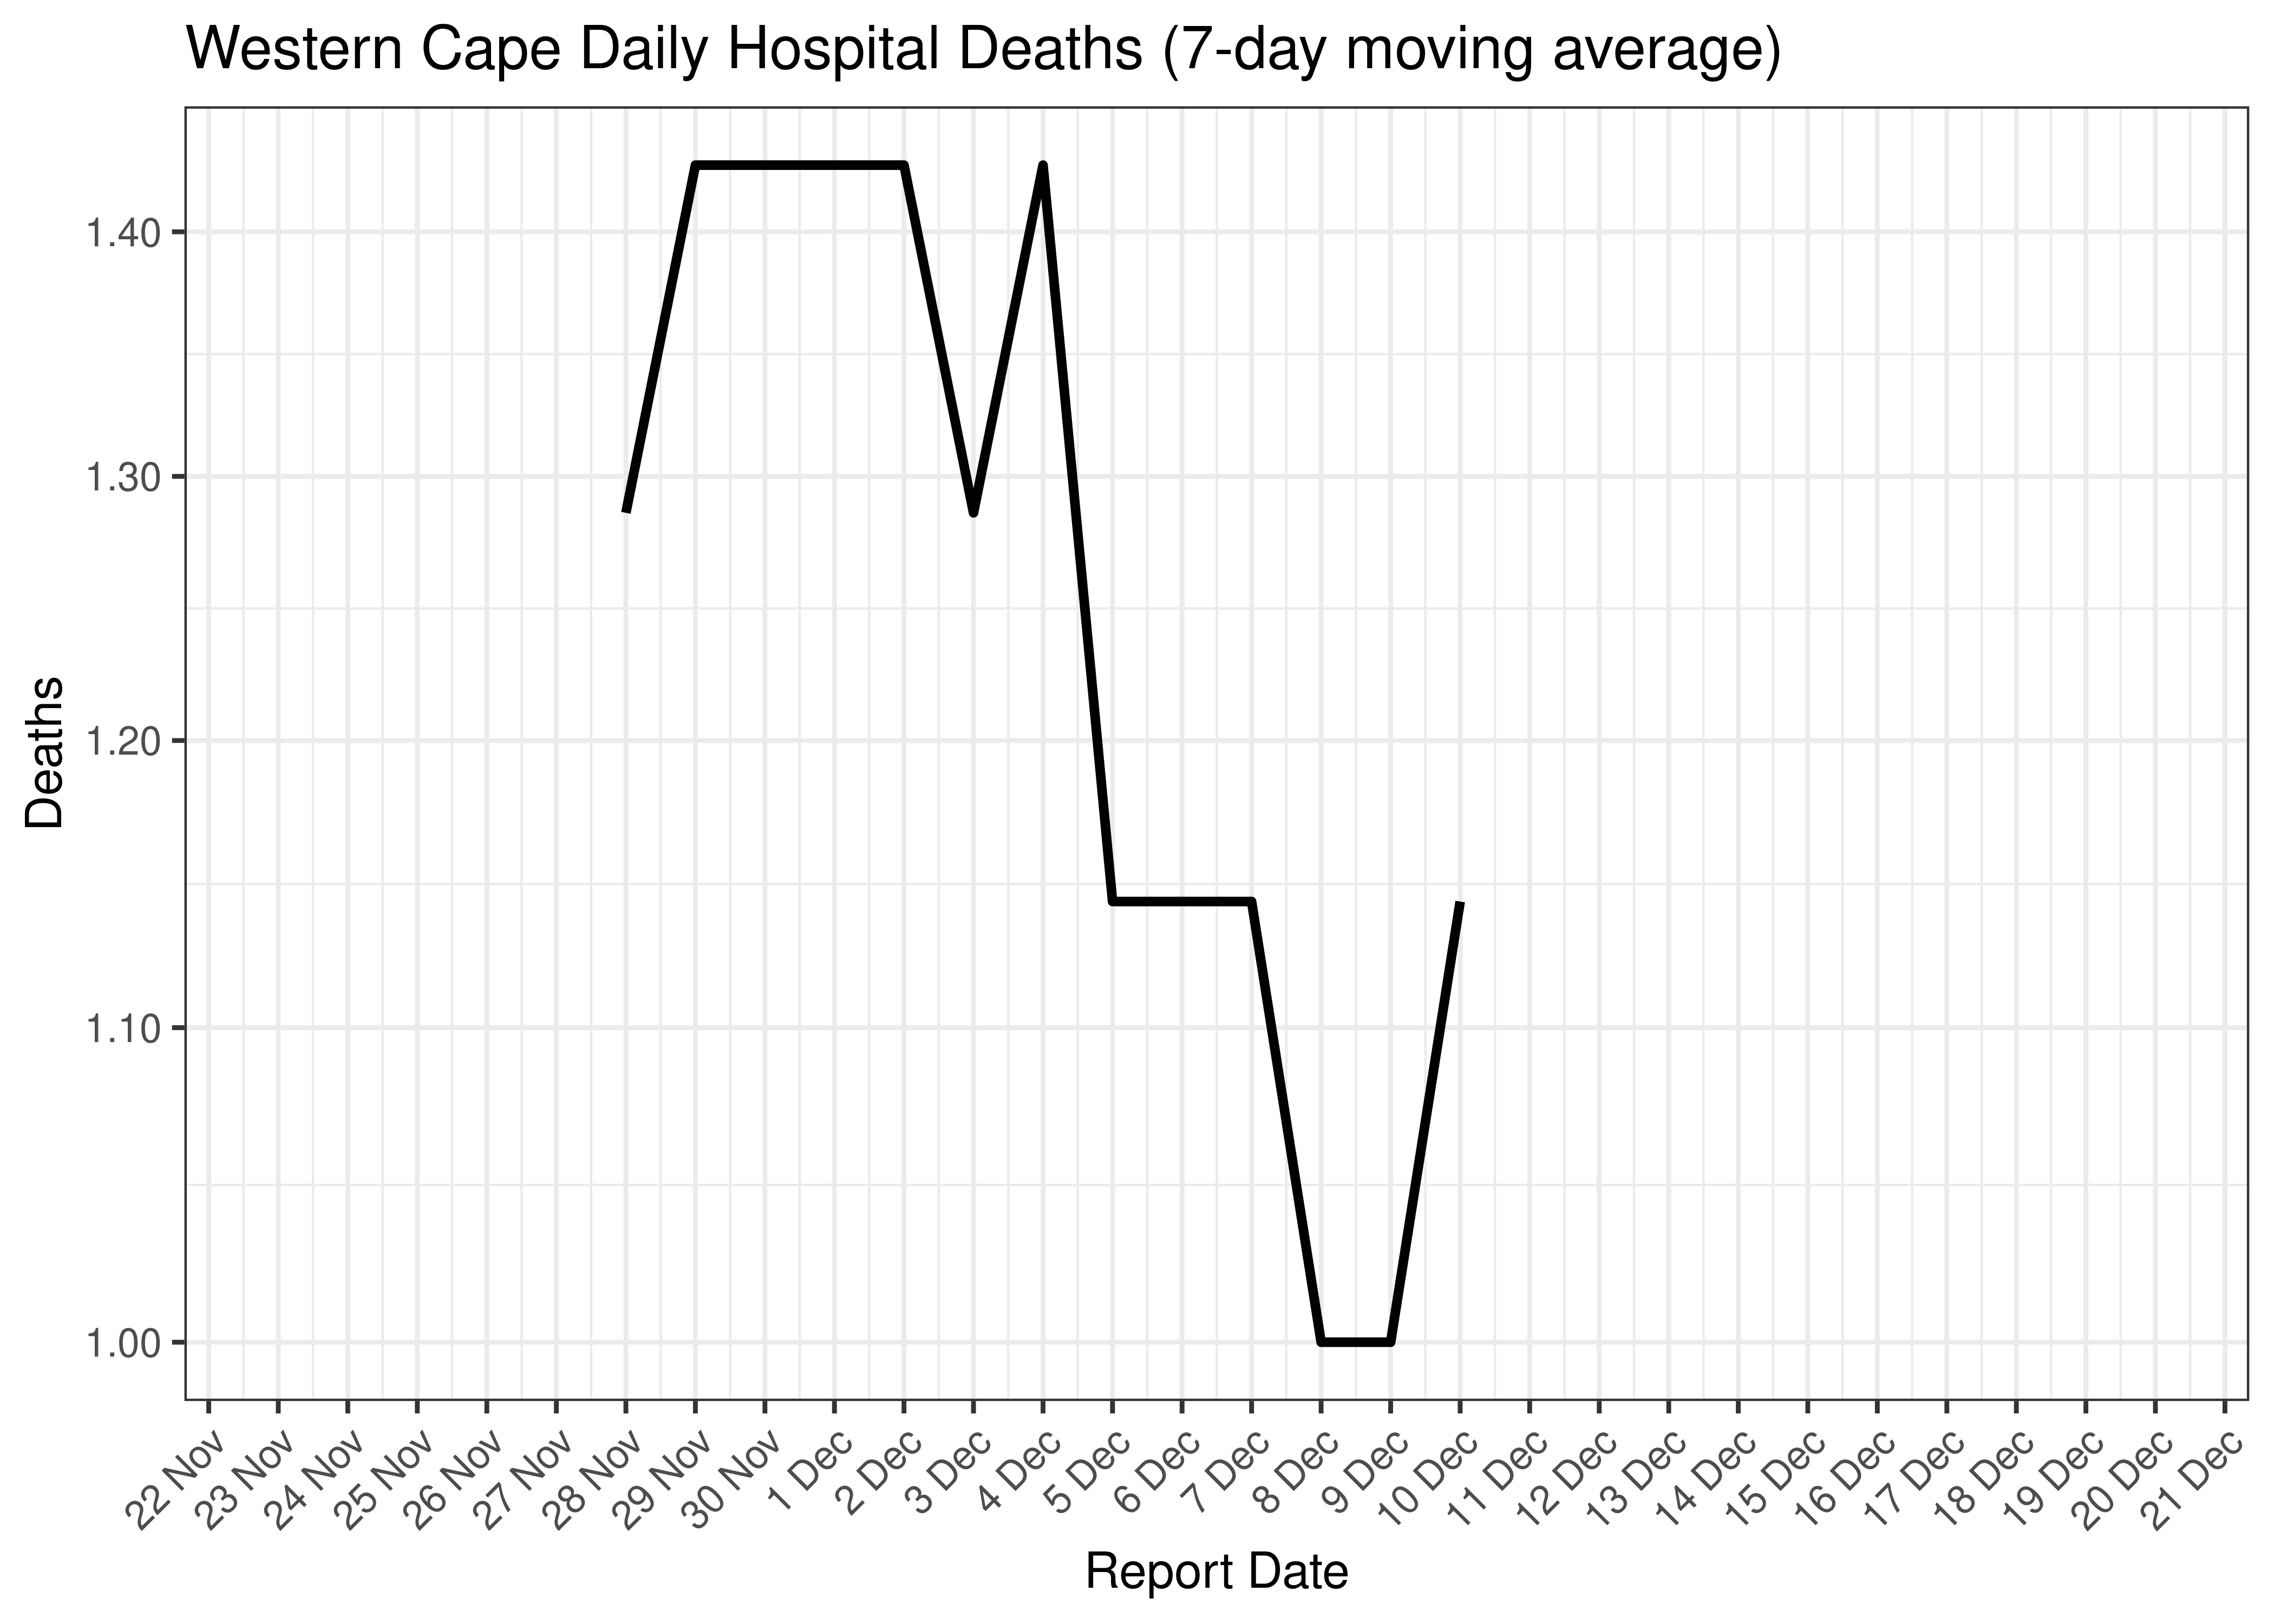 Western Cape Daily Hospital Deaths for Last 30-days (7-day moving average)